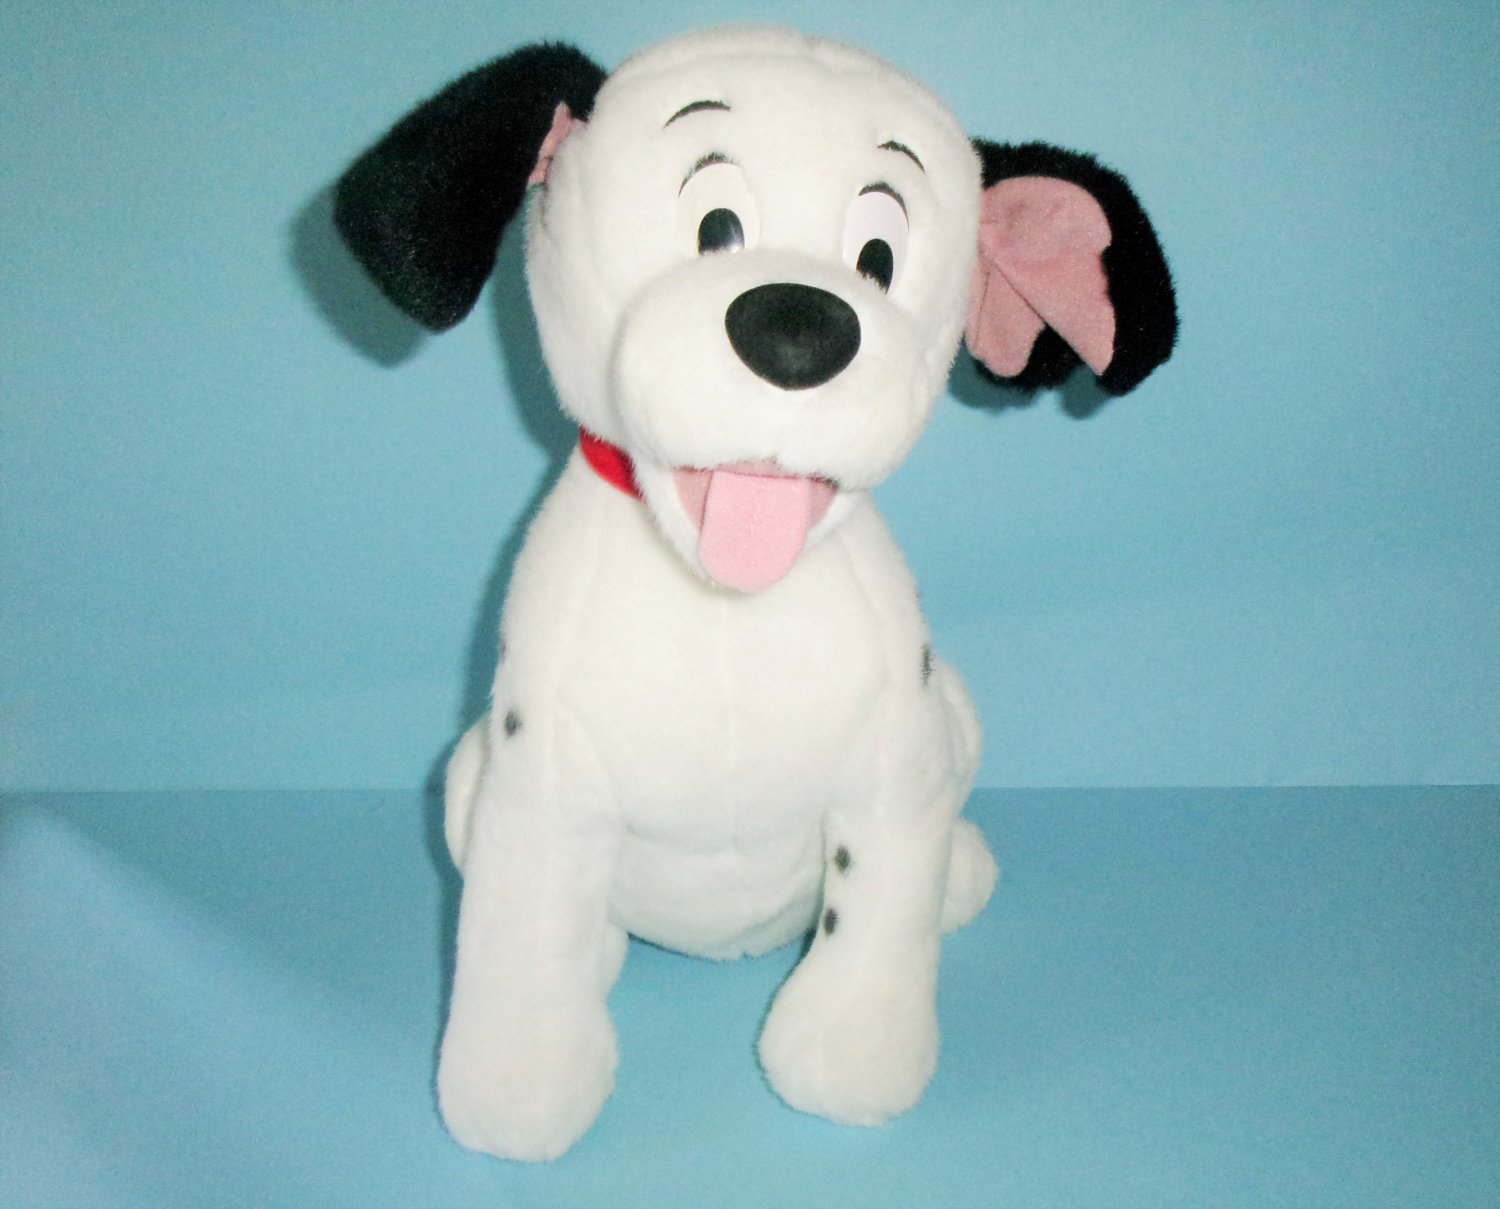 Disney 101 Dalmatians Plush Lucky the Dog Sitting 13 Inches With Red Name Collar